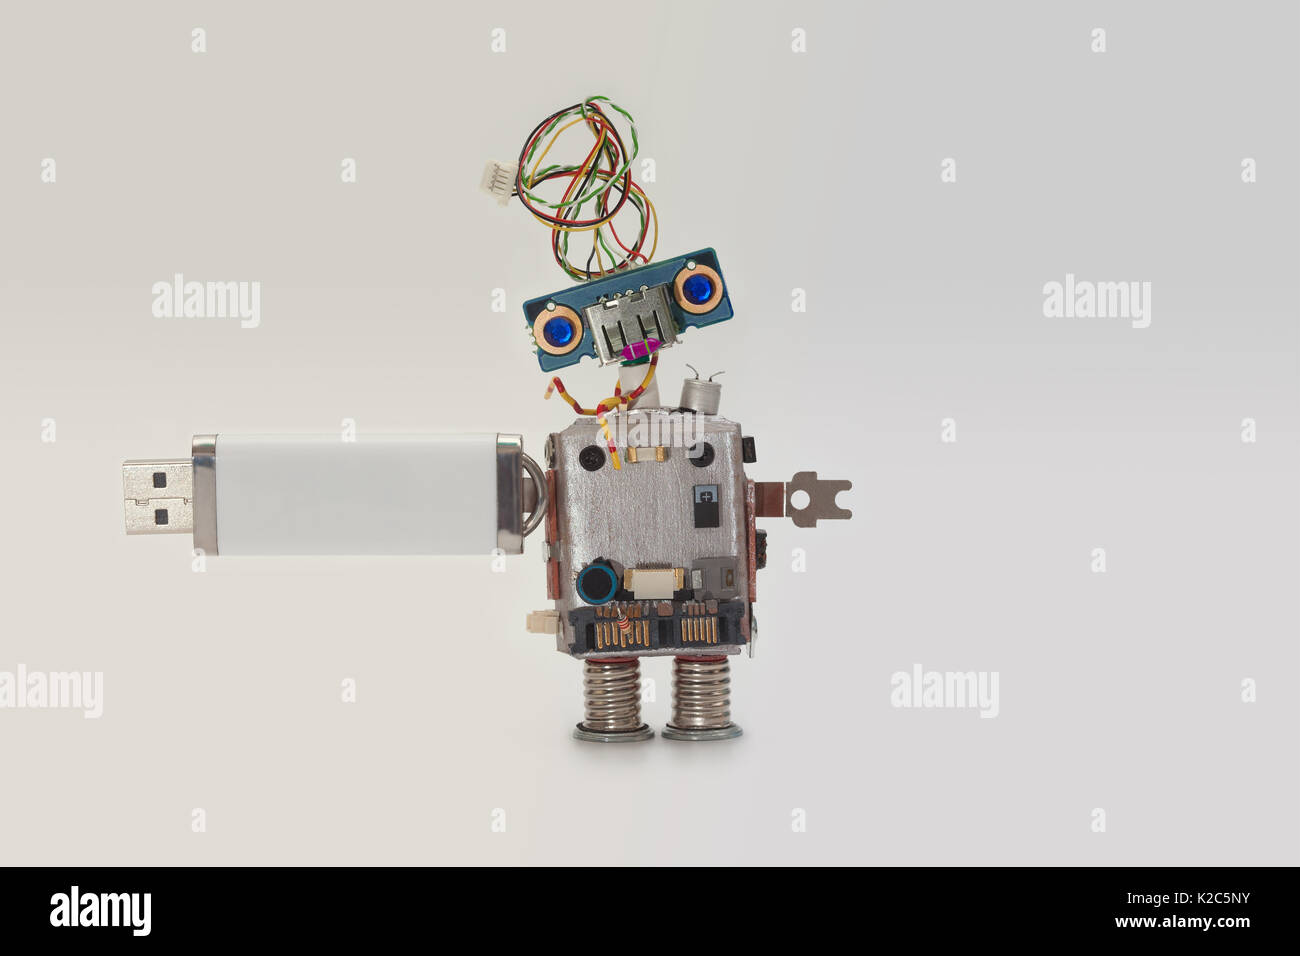 Robot with usb flash storage stick. Data storing concept, abstract computer  character blue eyed head, electrical wire hairstyle. Copy space, gradient  white gray background Stock Photo - Alamy